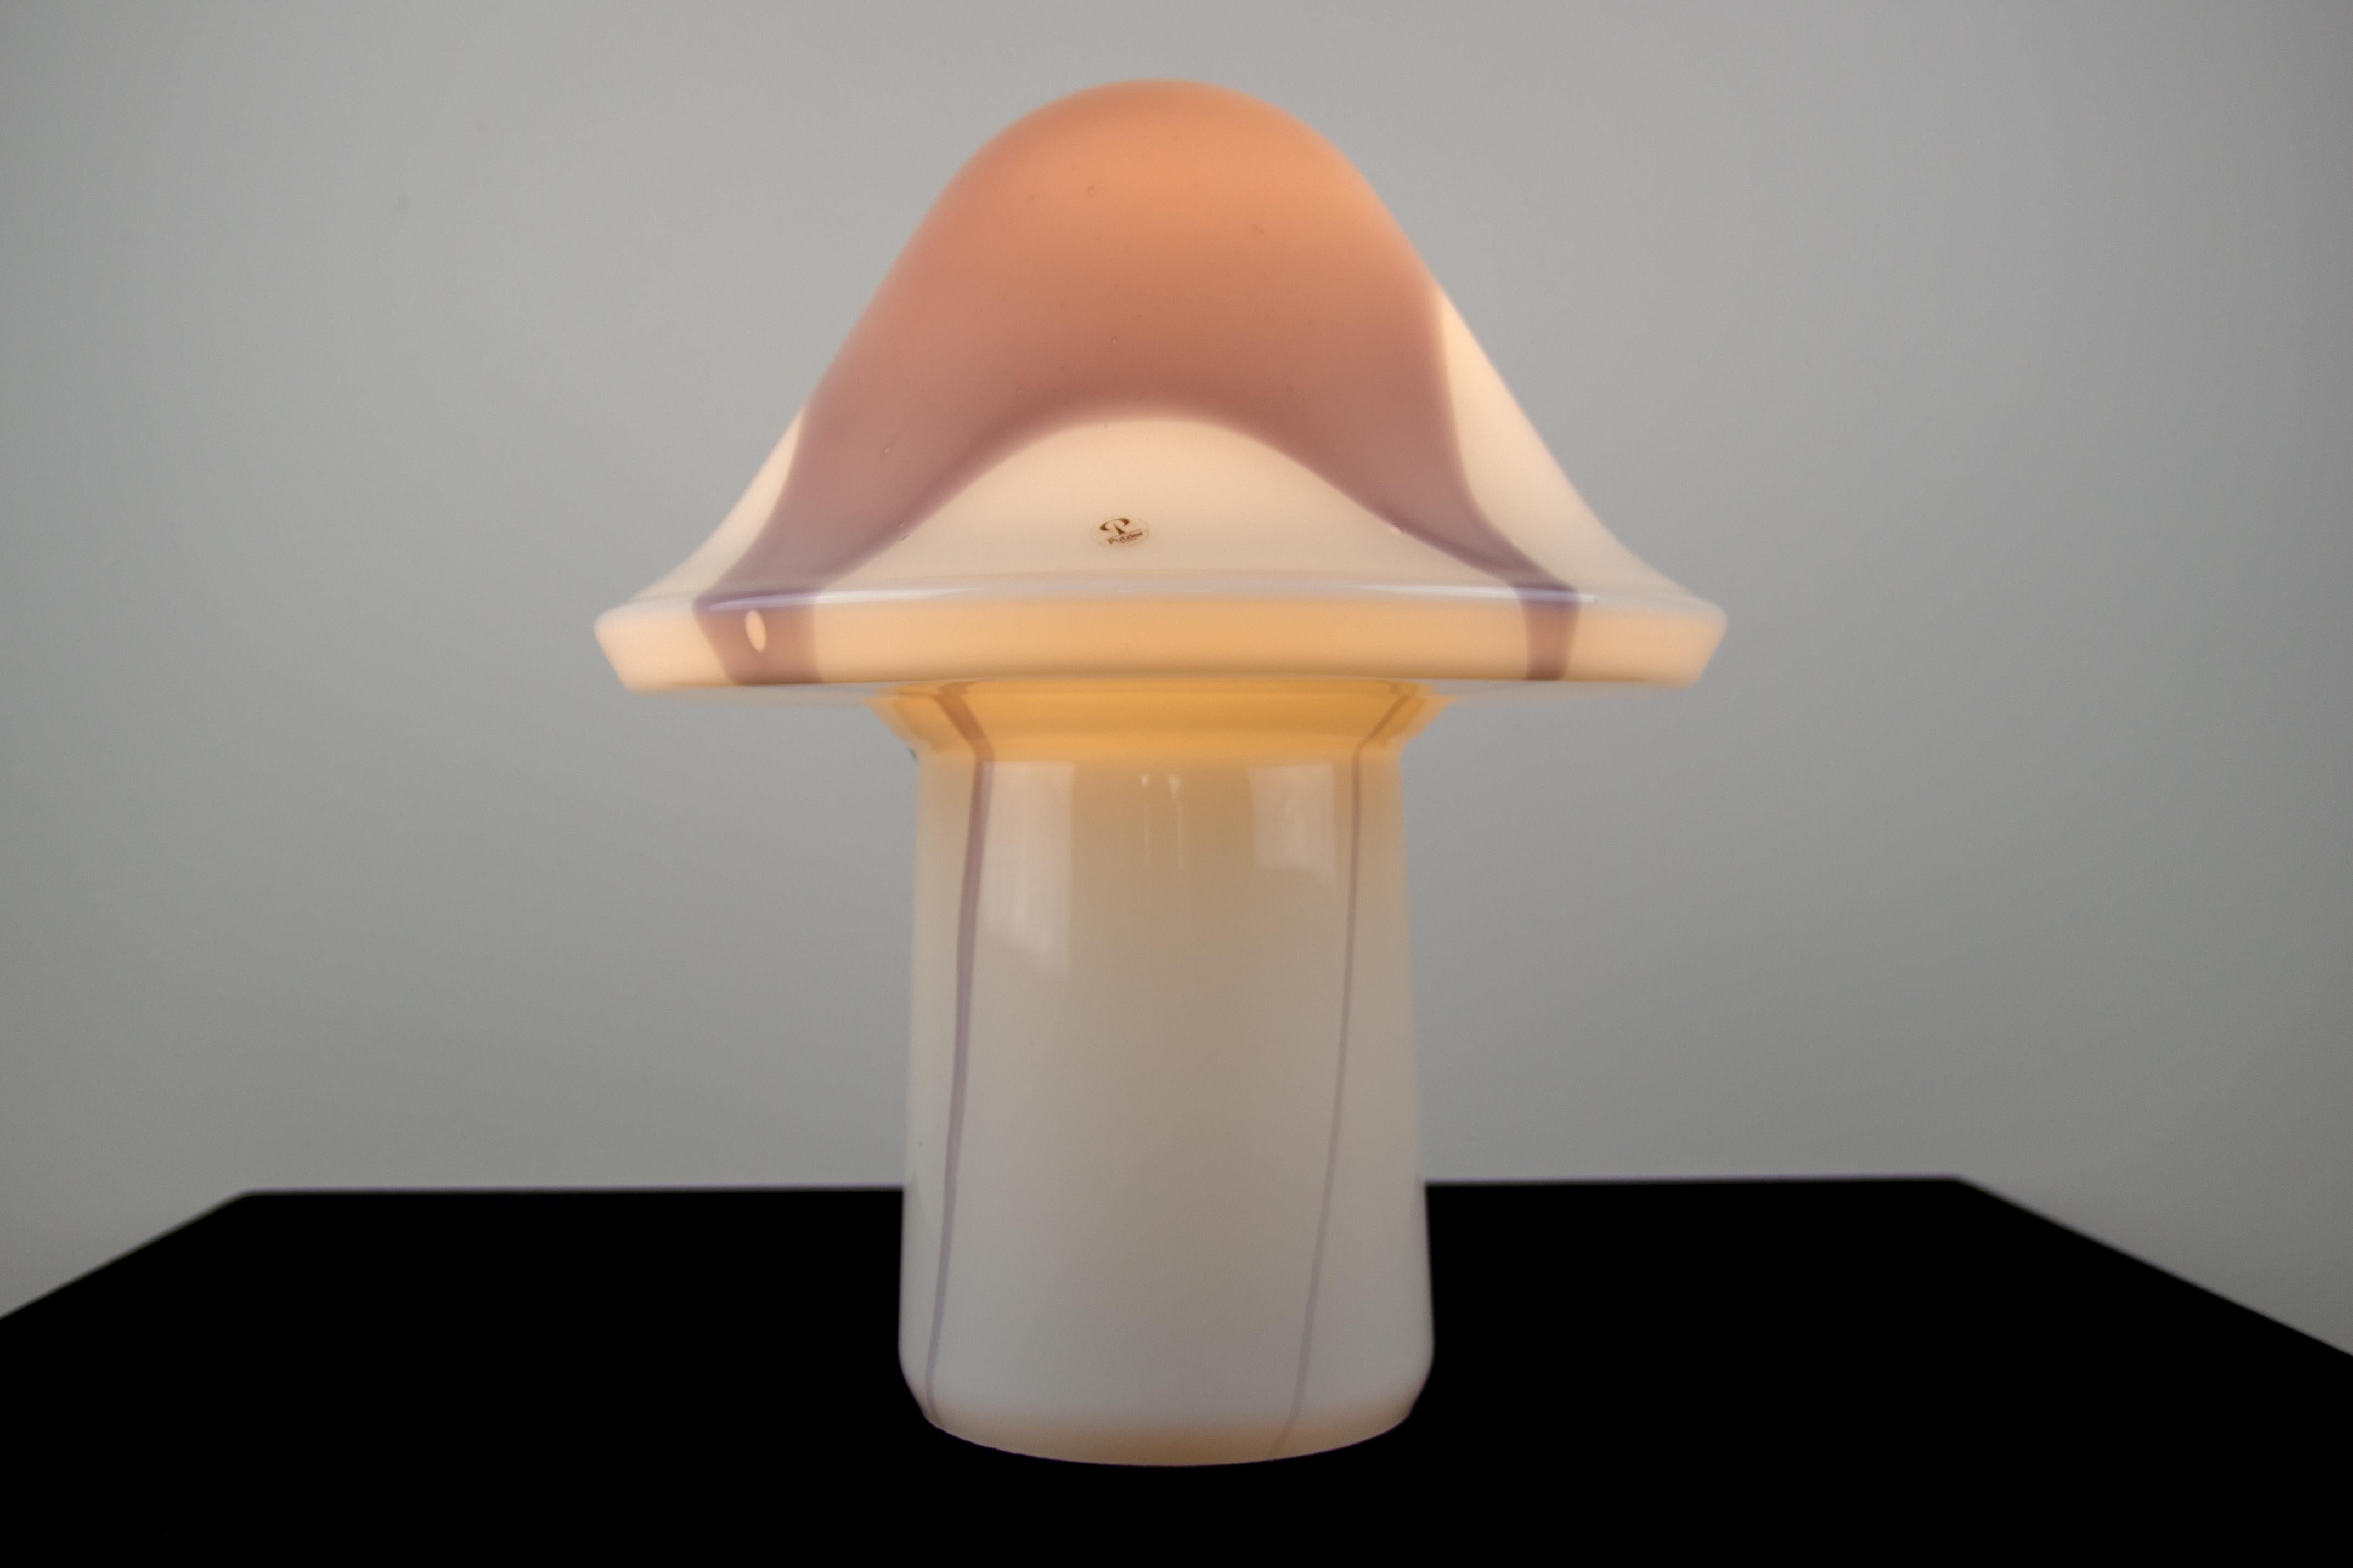 This beautiful and rare model mushroom-shaped table lamp is designed by Peill & Putzler and produced in Germany in the 1970s. The lamp is made of glass and has lilac-grey coloration over the lamp - throughout the shade and body.
One socket for an